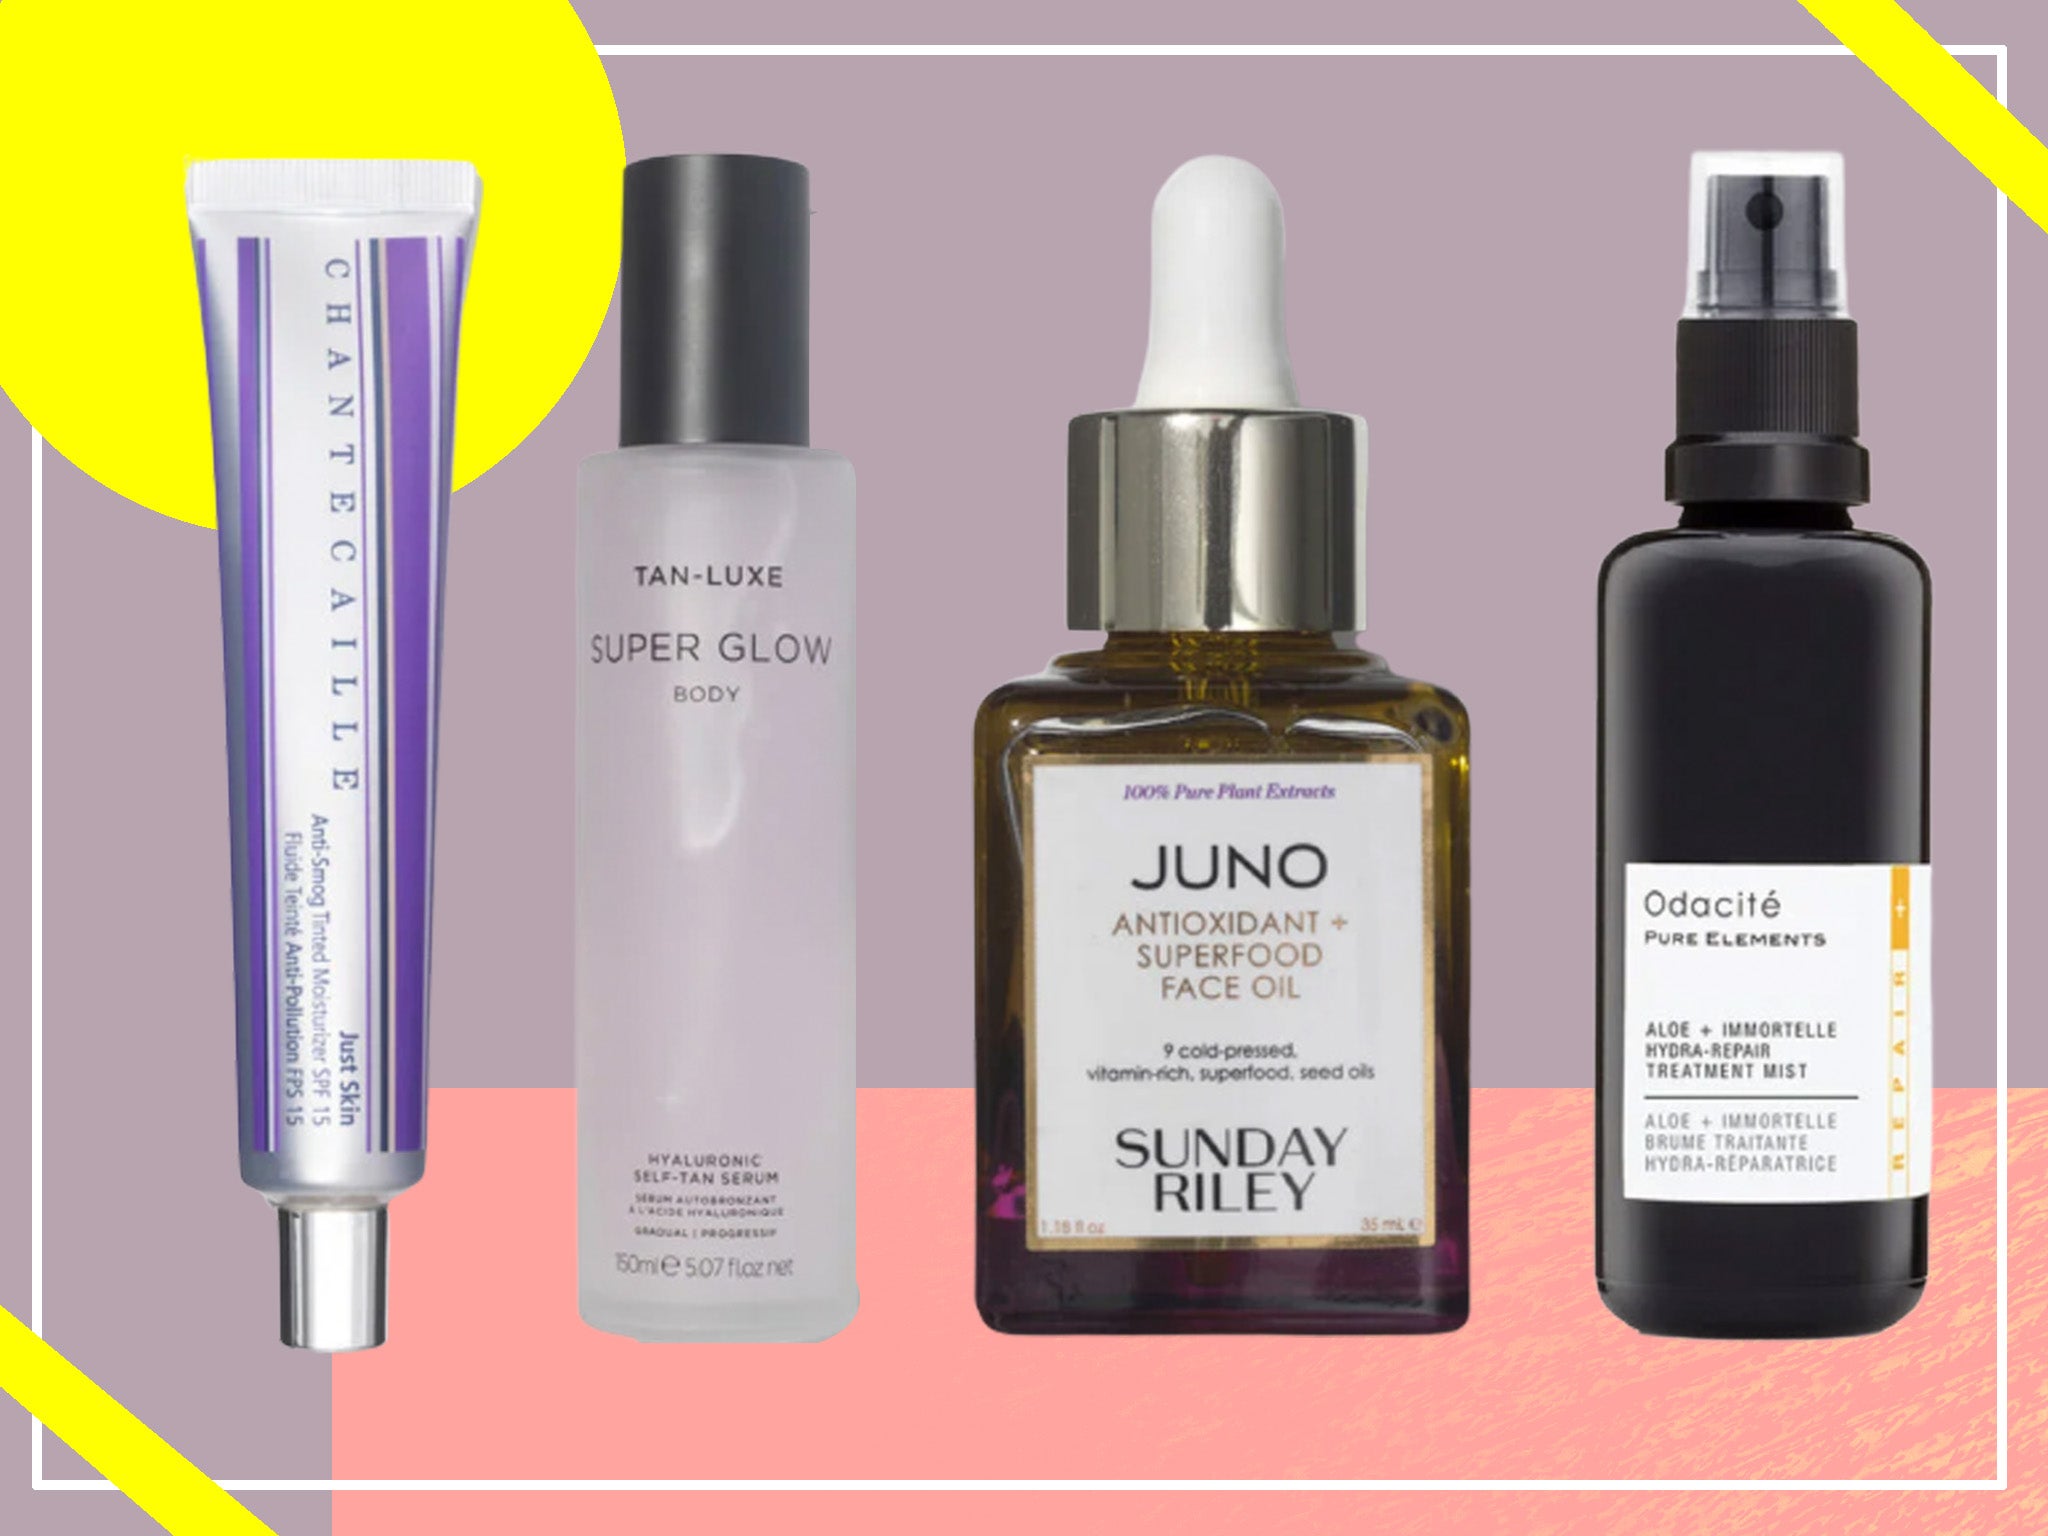 From face oils to mists, serums to cleanser, it’s the perfect opportunity to update your bathroom shelf